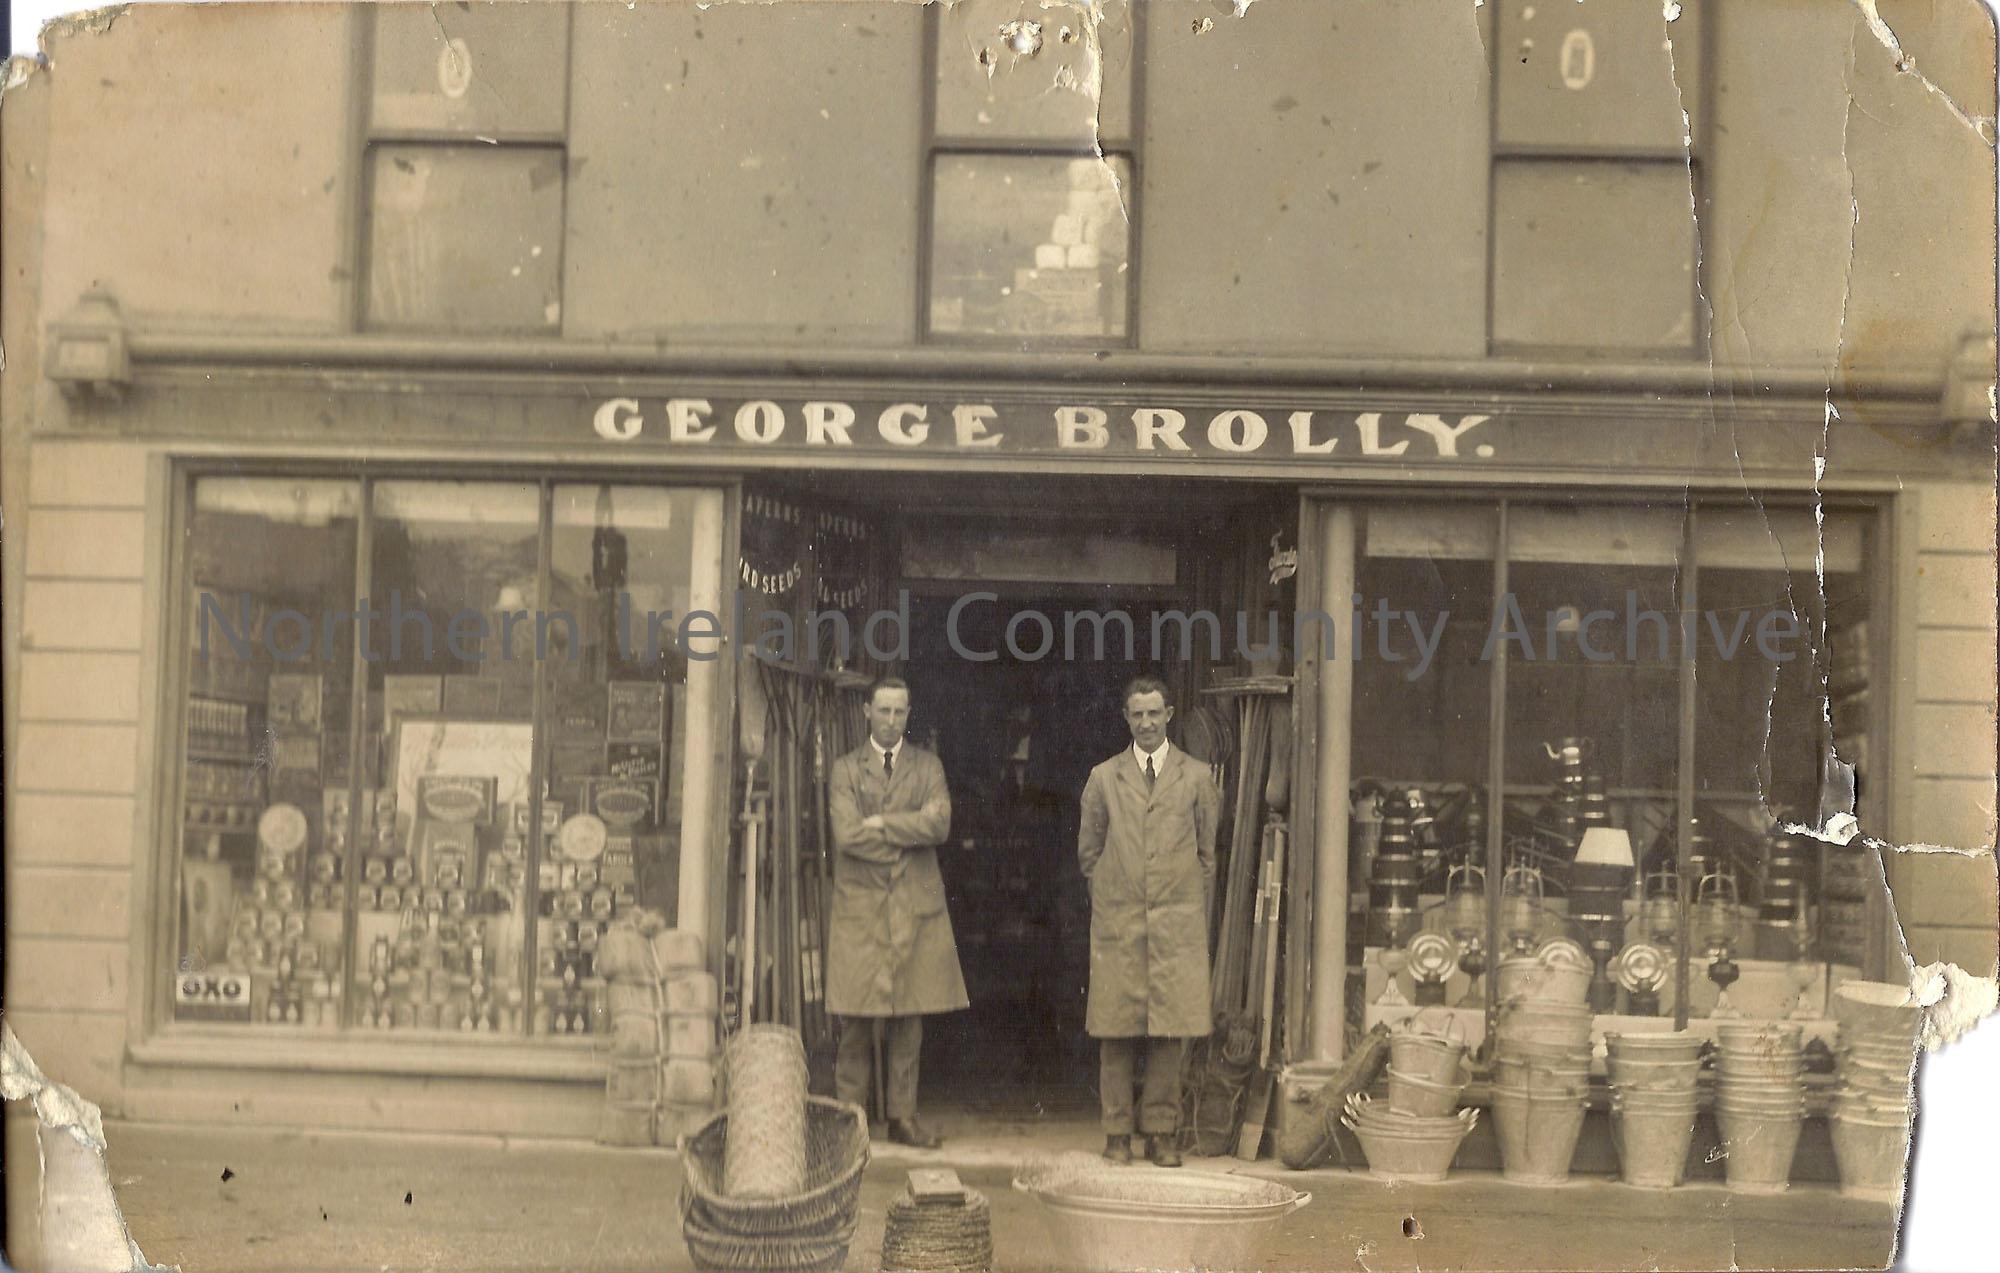 George Brolly Grocery Shop, early 1900’s